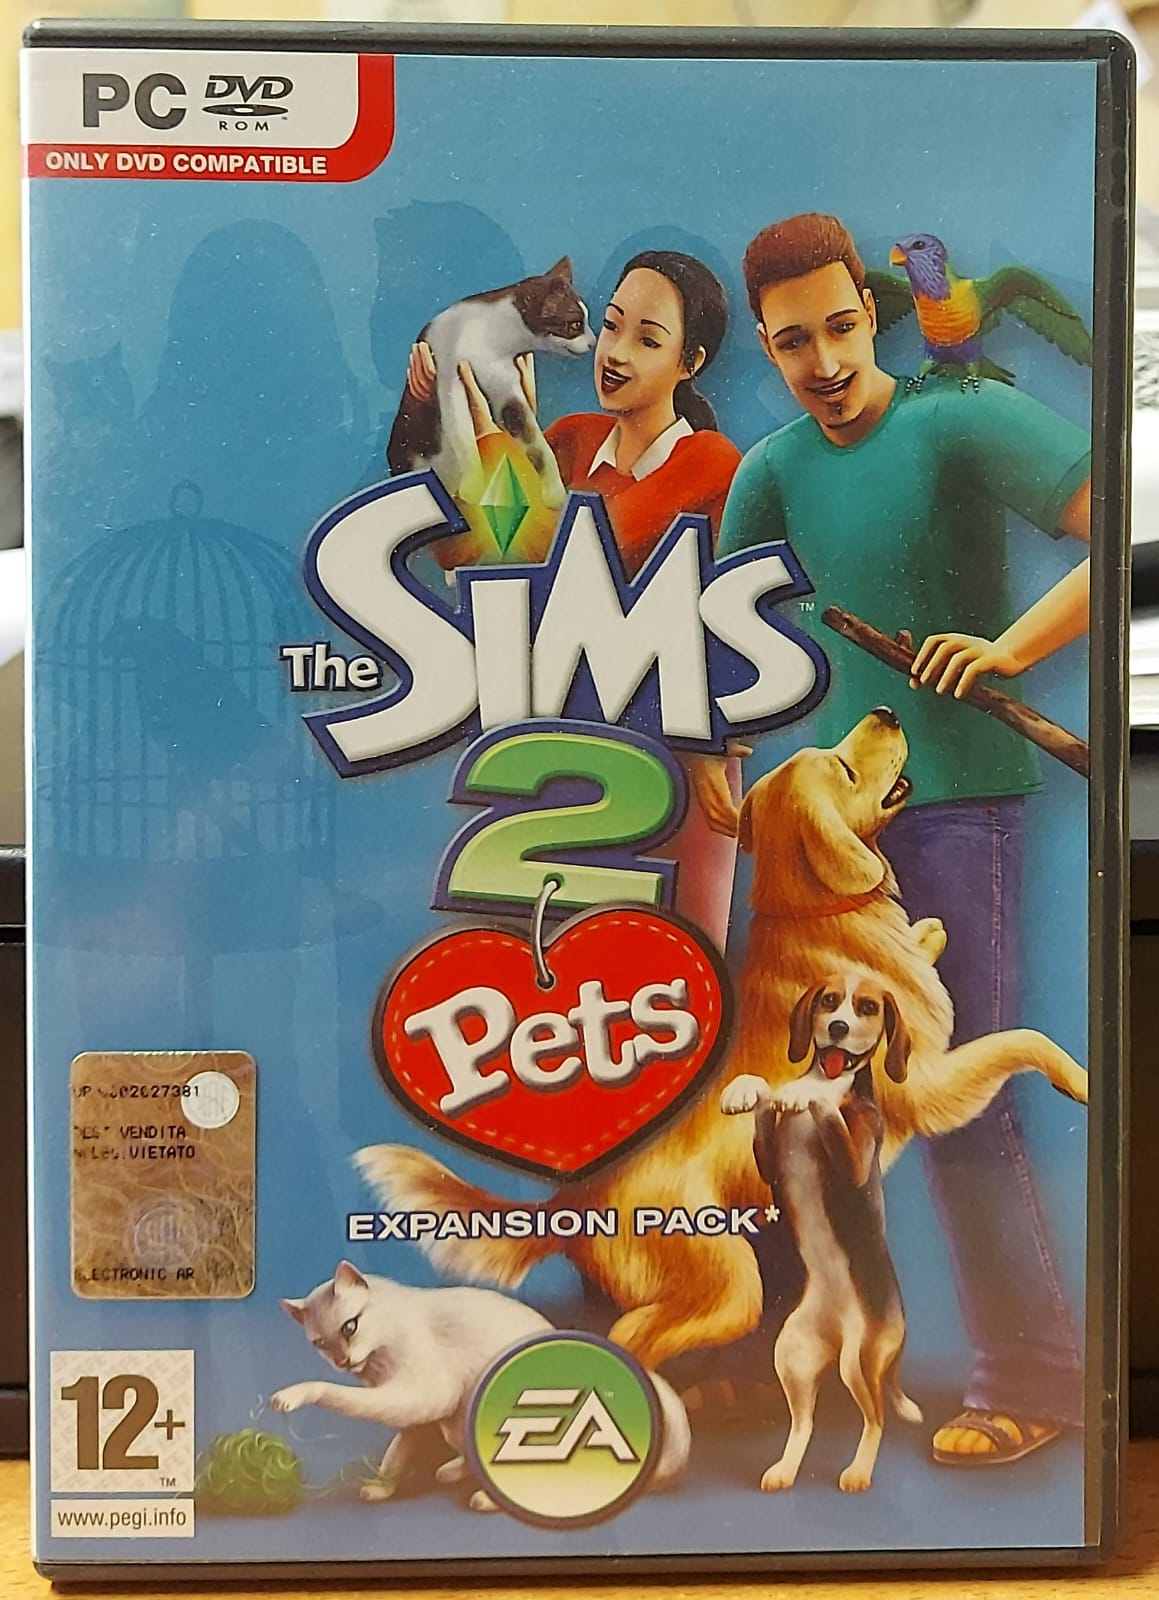 THE SIMS 2 PETS - EXPANSION PACK